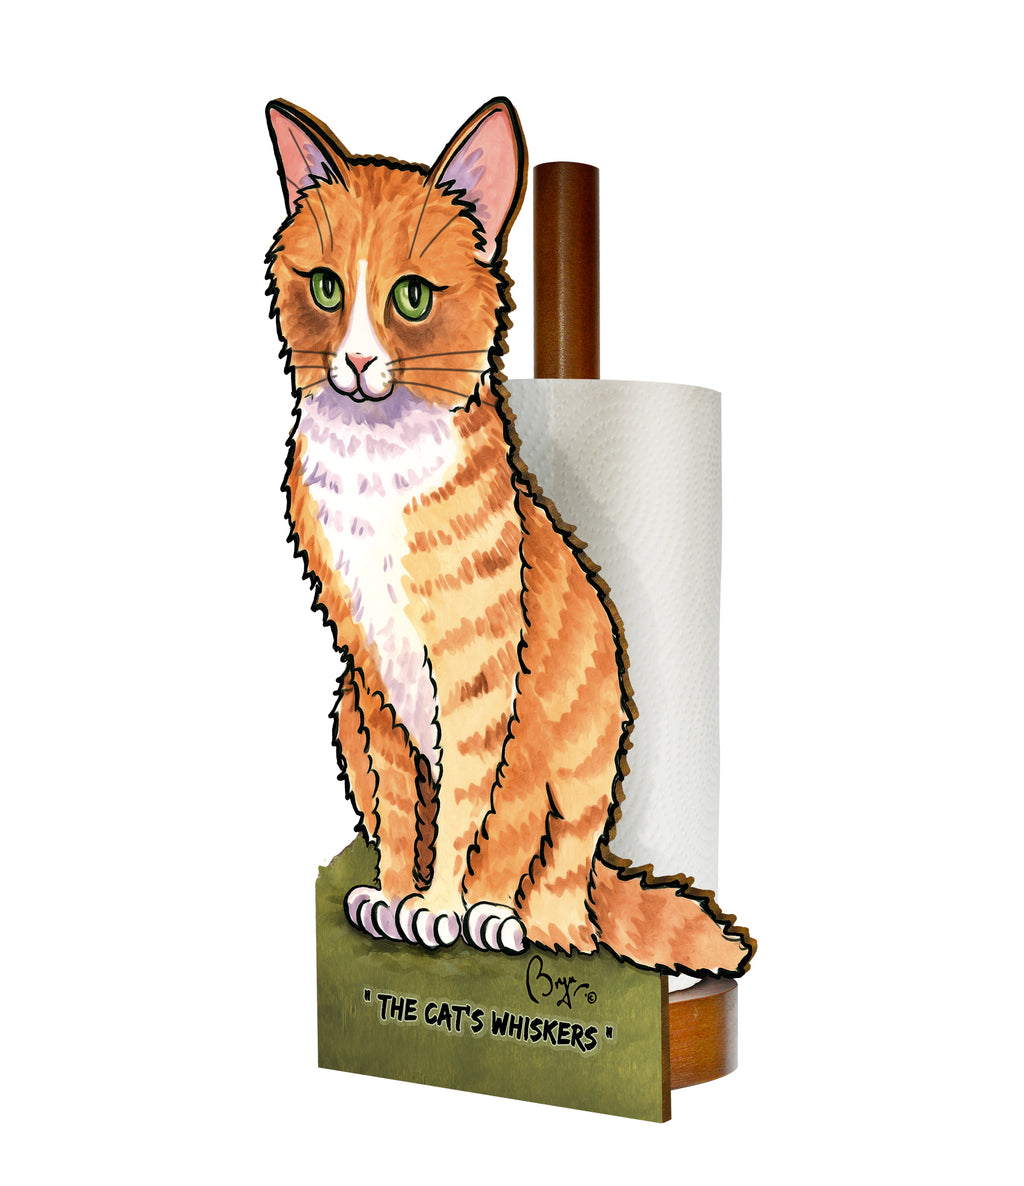 Cat's Whiskers (Bryn Parry ) - Printed Wood Toilet Roll / Kitchen Roll Holder